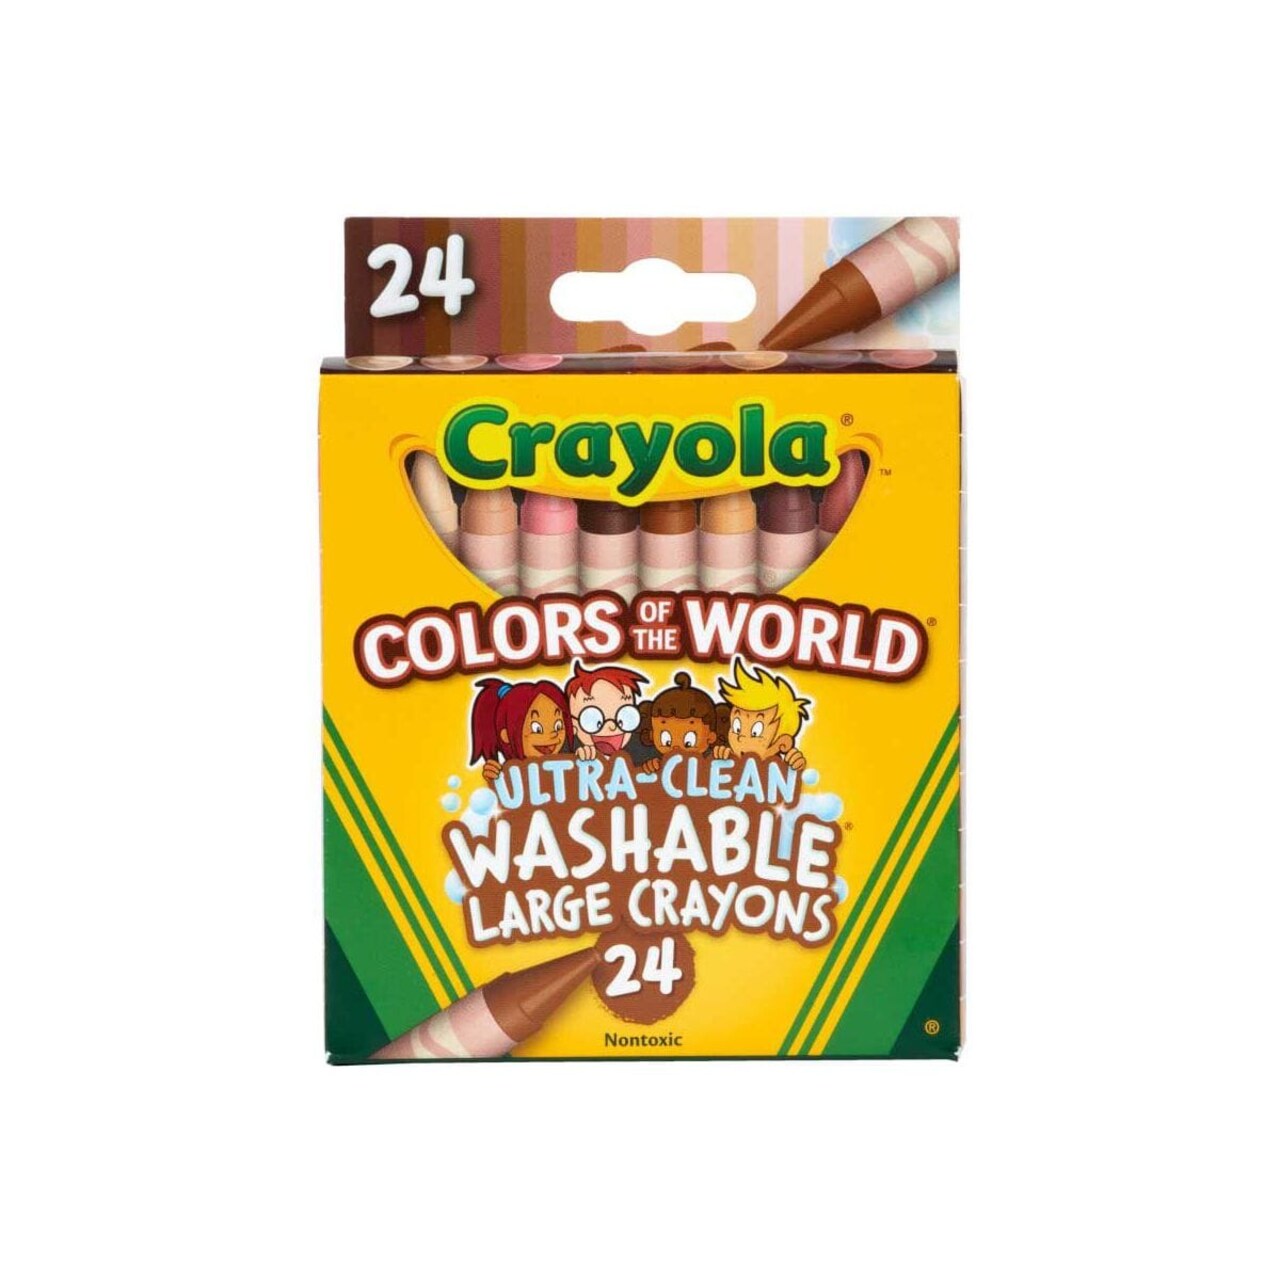 Crayola Colors of The World Crayons